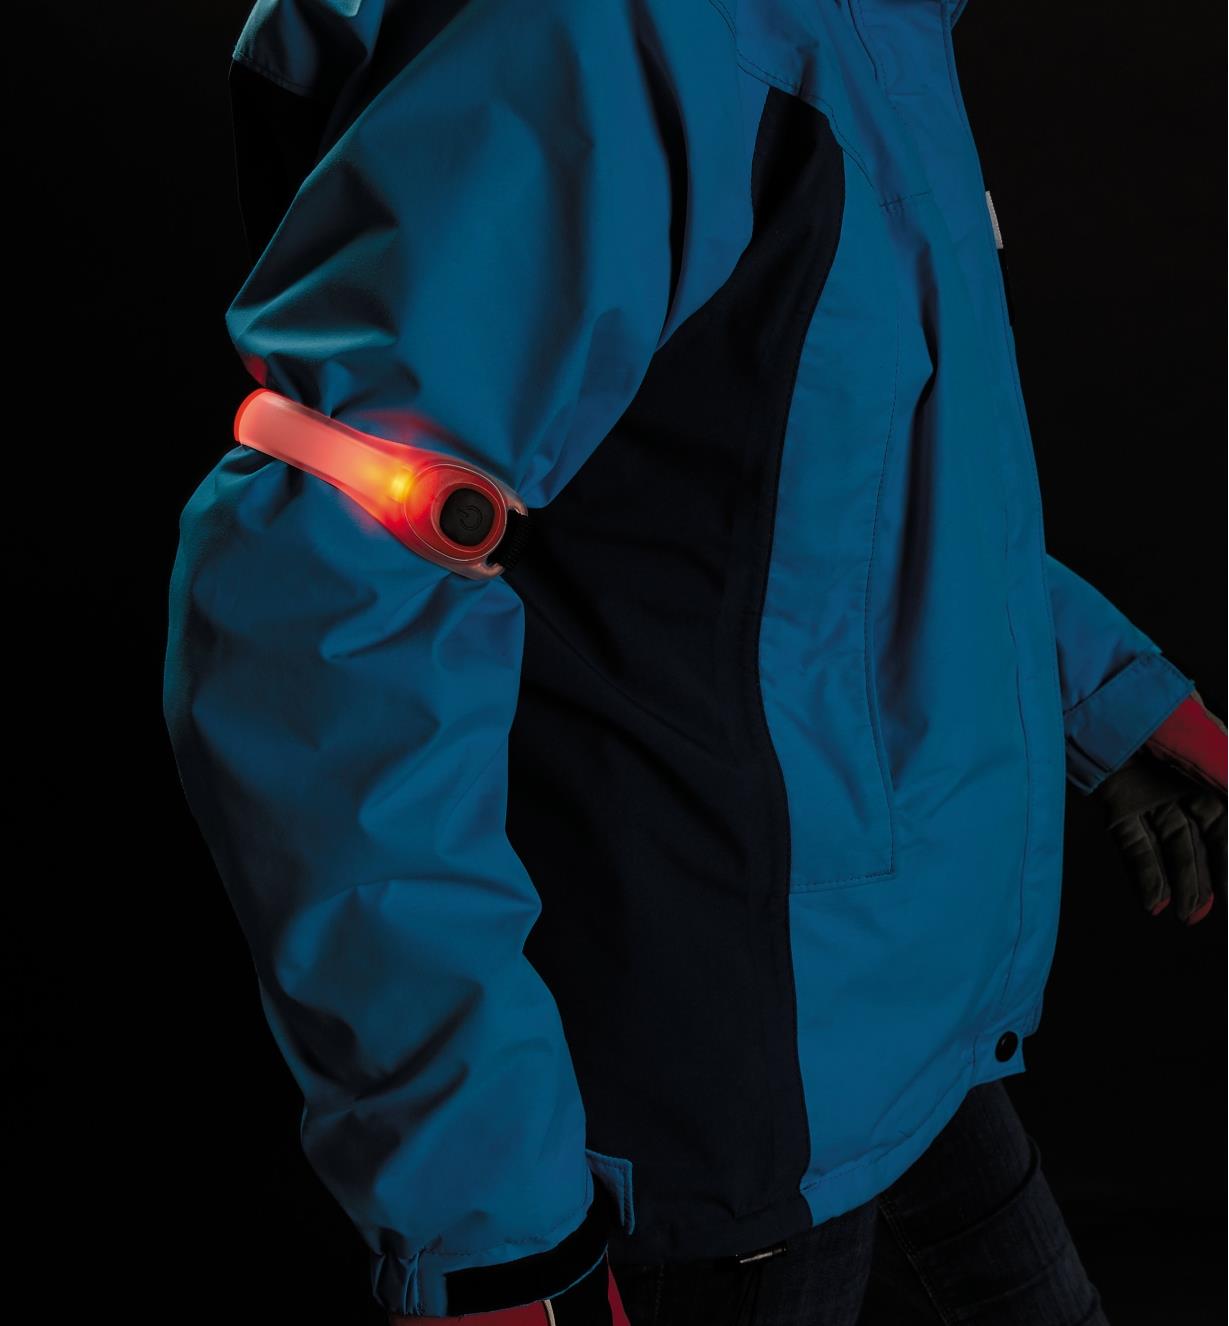 Red Wrap Light wrapped around the arm of a person's jacket at night